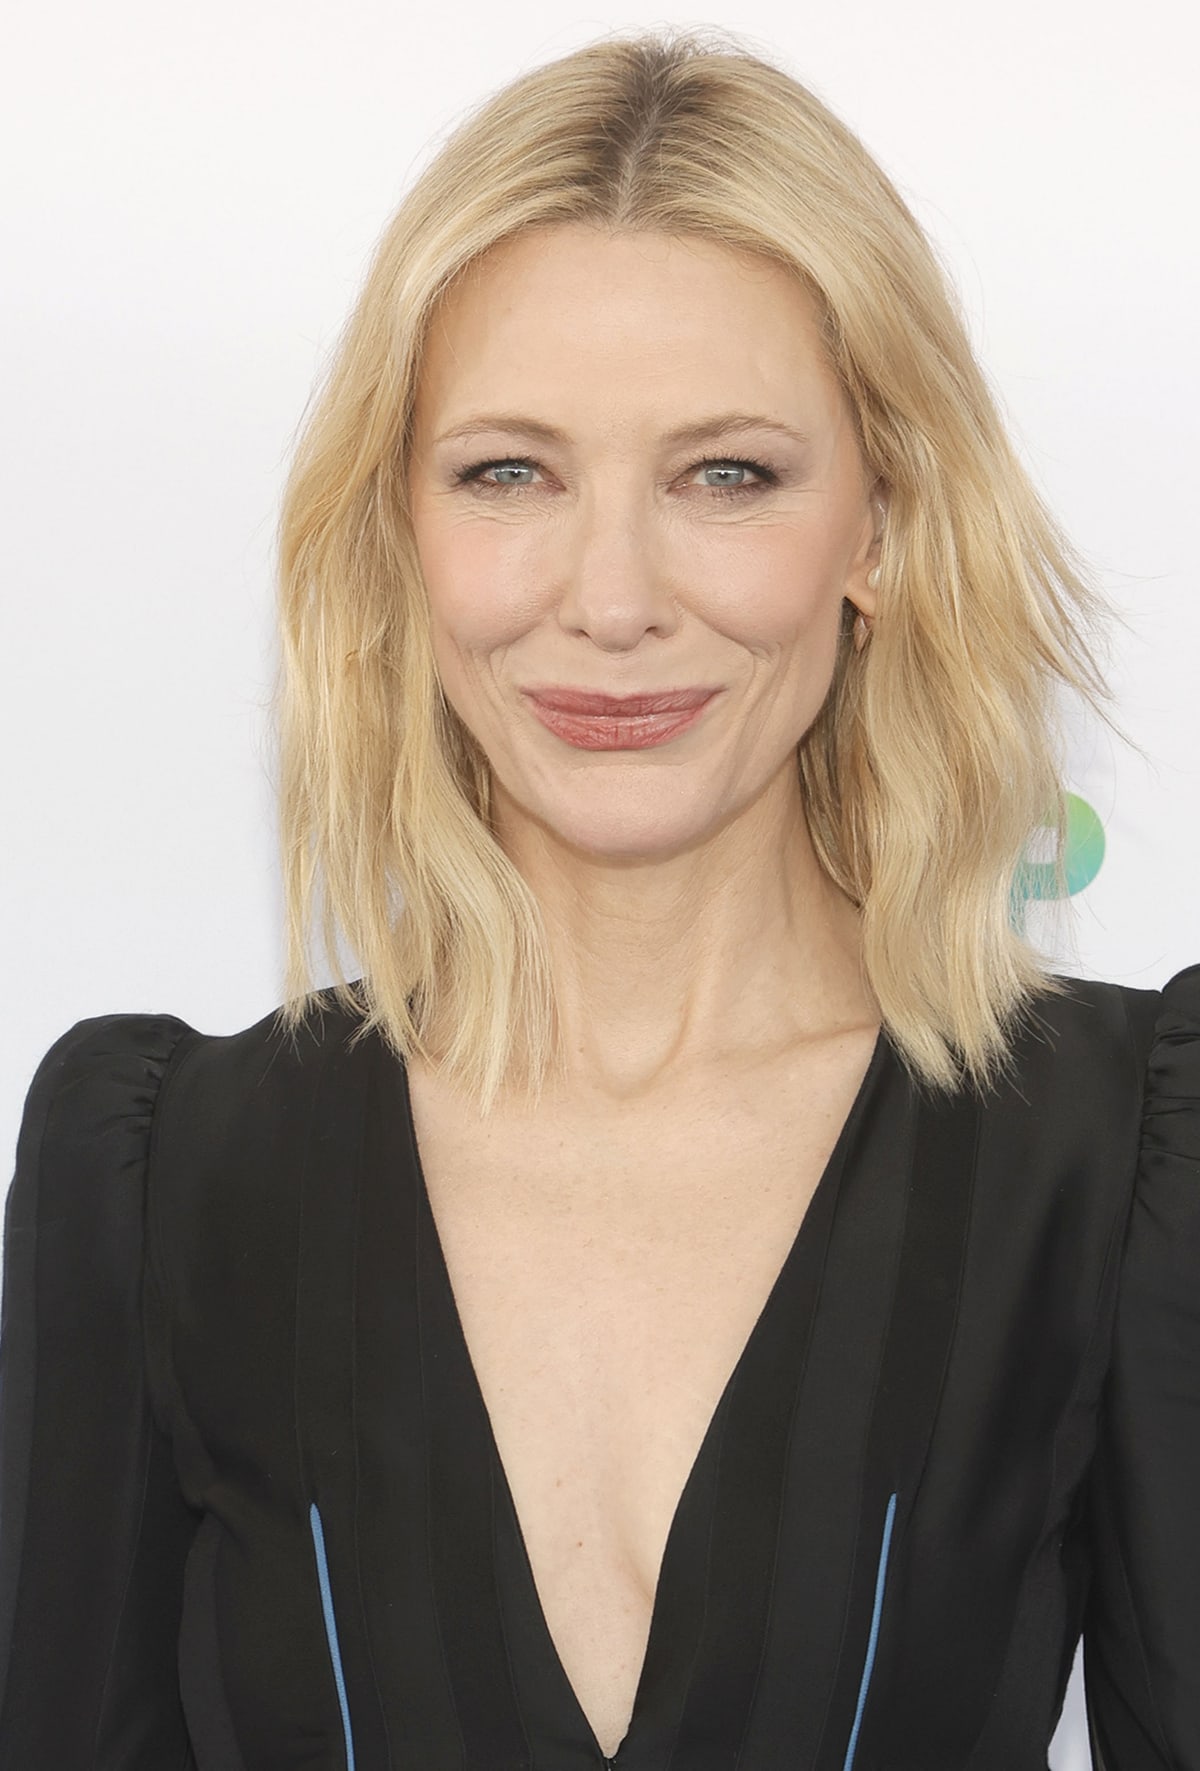 Cate Blanchett wears her blonde hair in loose waves and accentuates her features with Armani Beauty makeup